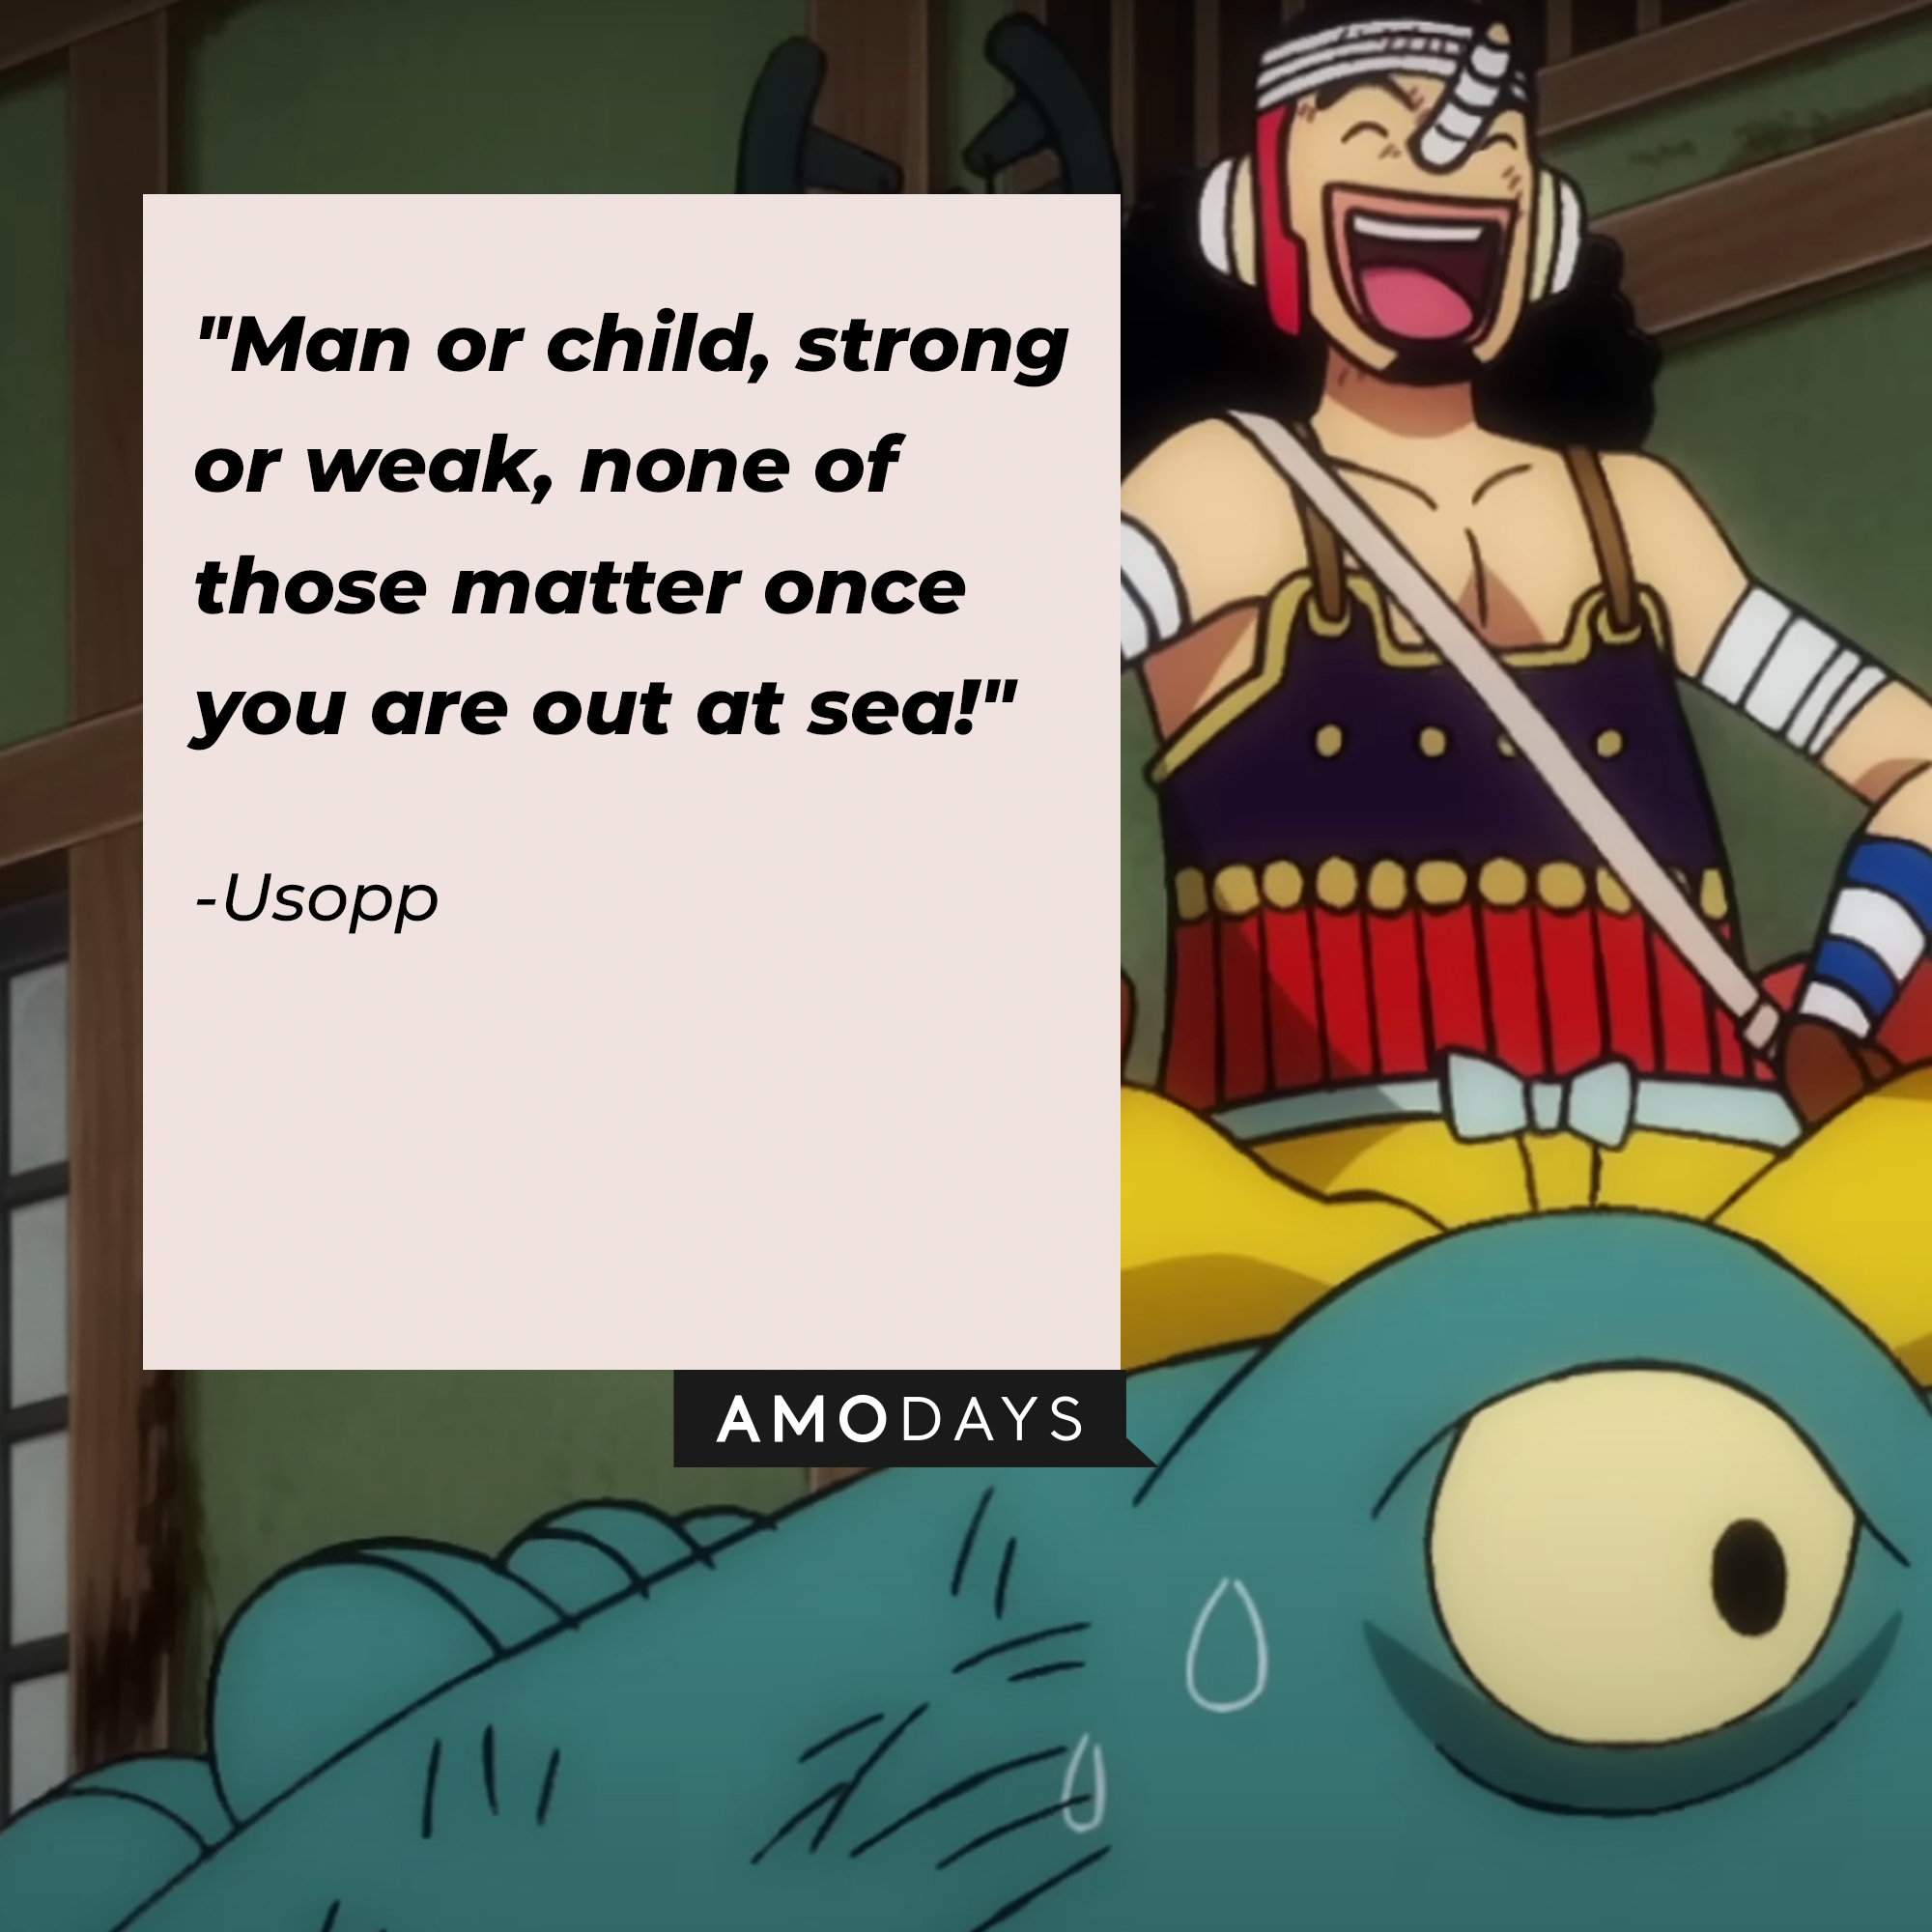 Usopp, with his quote: "Serves you right! You've underestimated me!" | Source: facebook.com/onepieceofficial